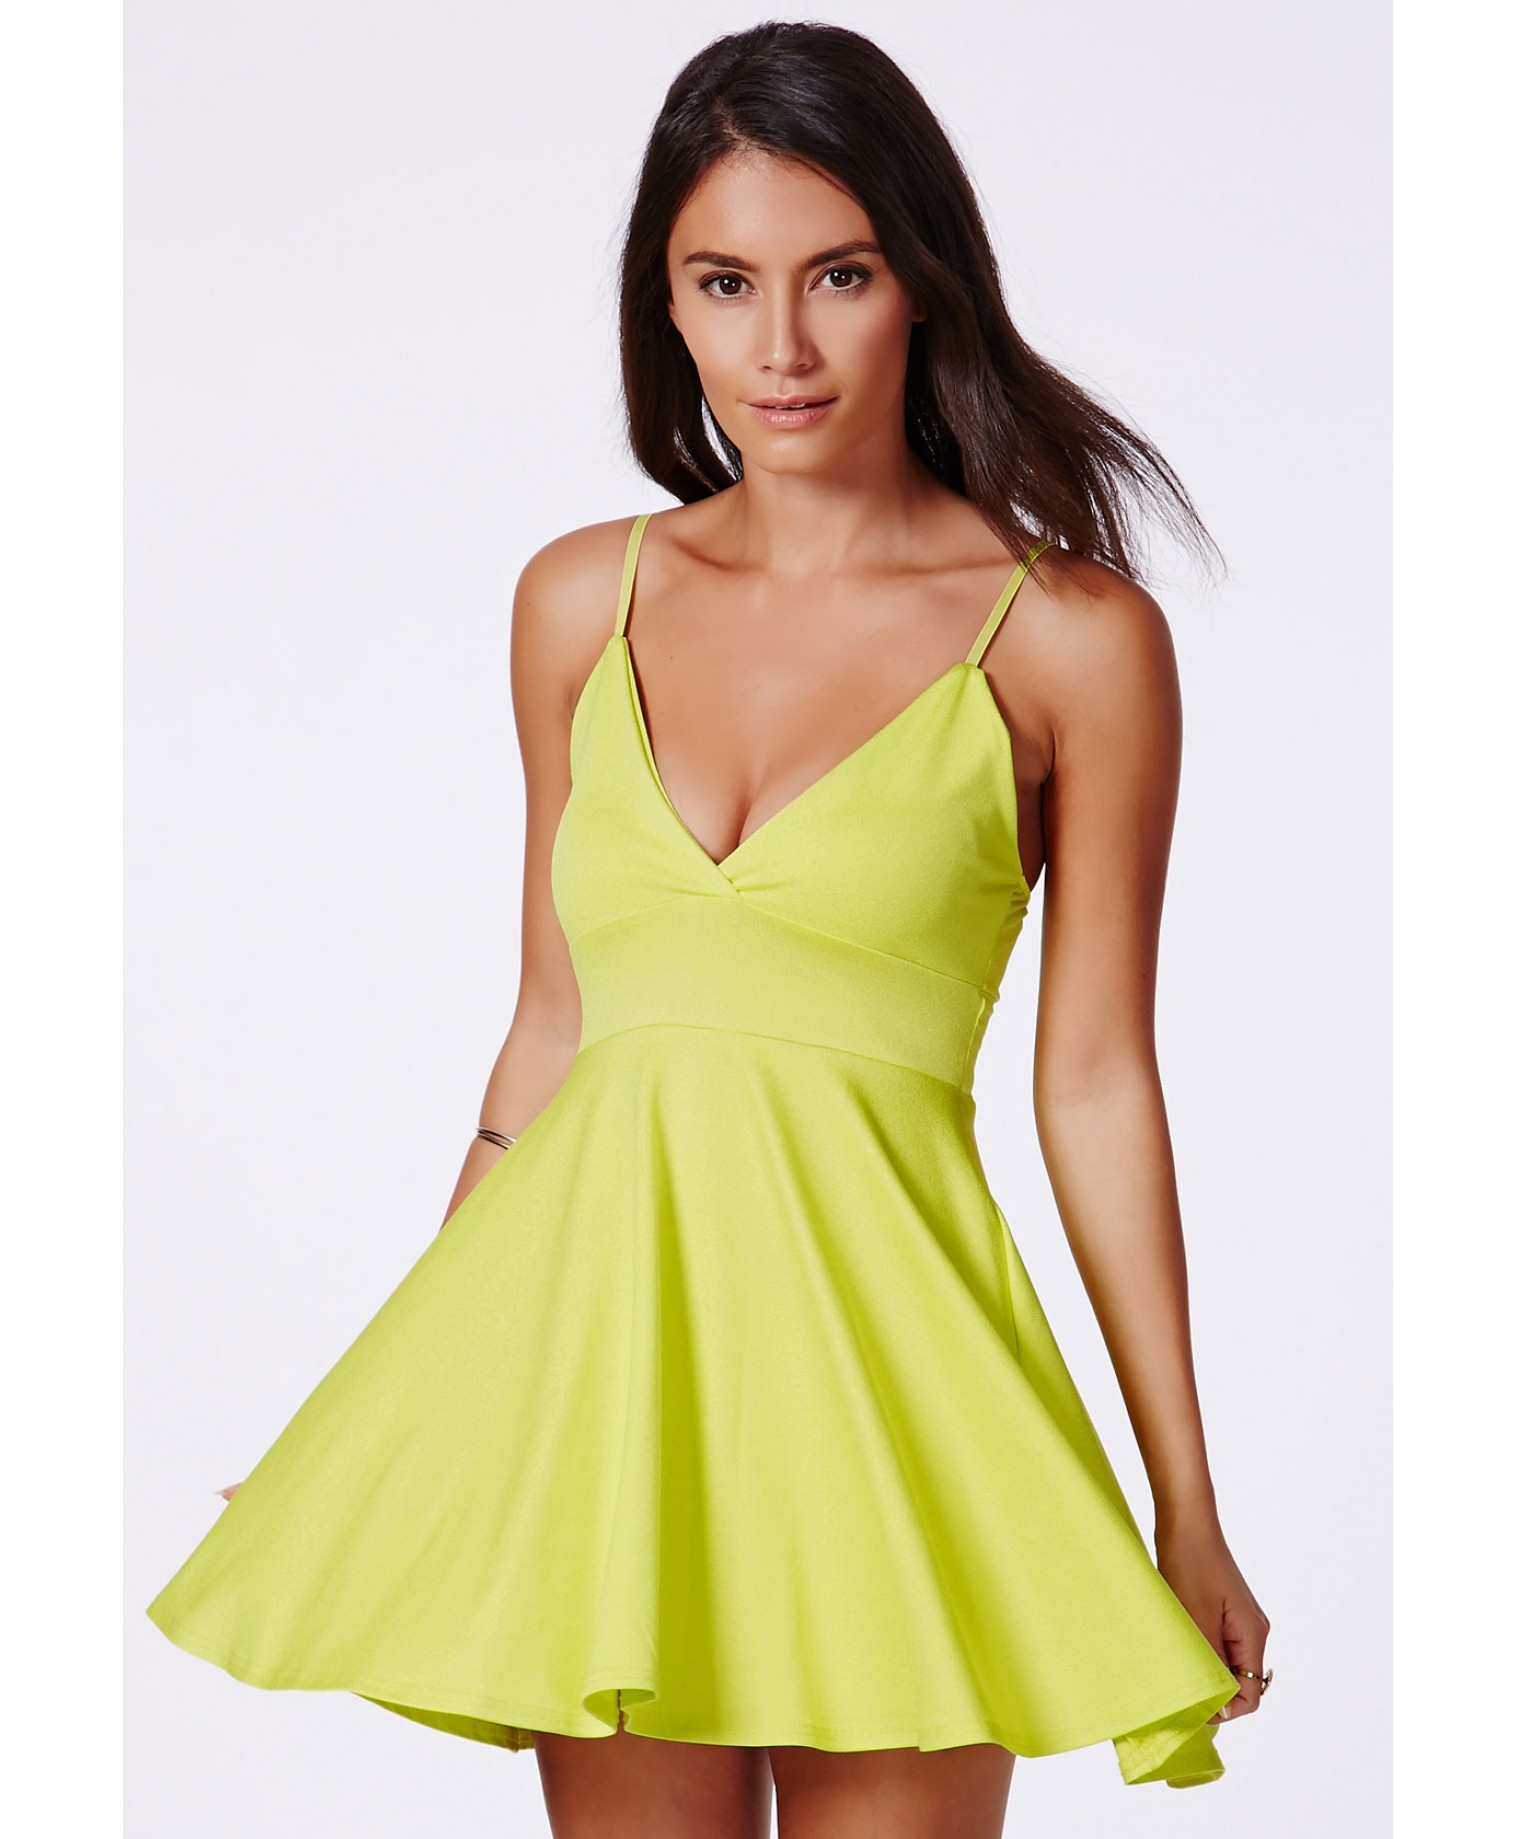 Lyst - Missguided Herta Lime Strappy Skater Dress in Yellow